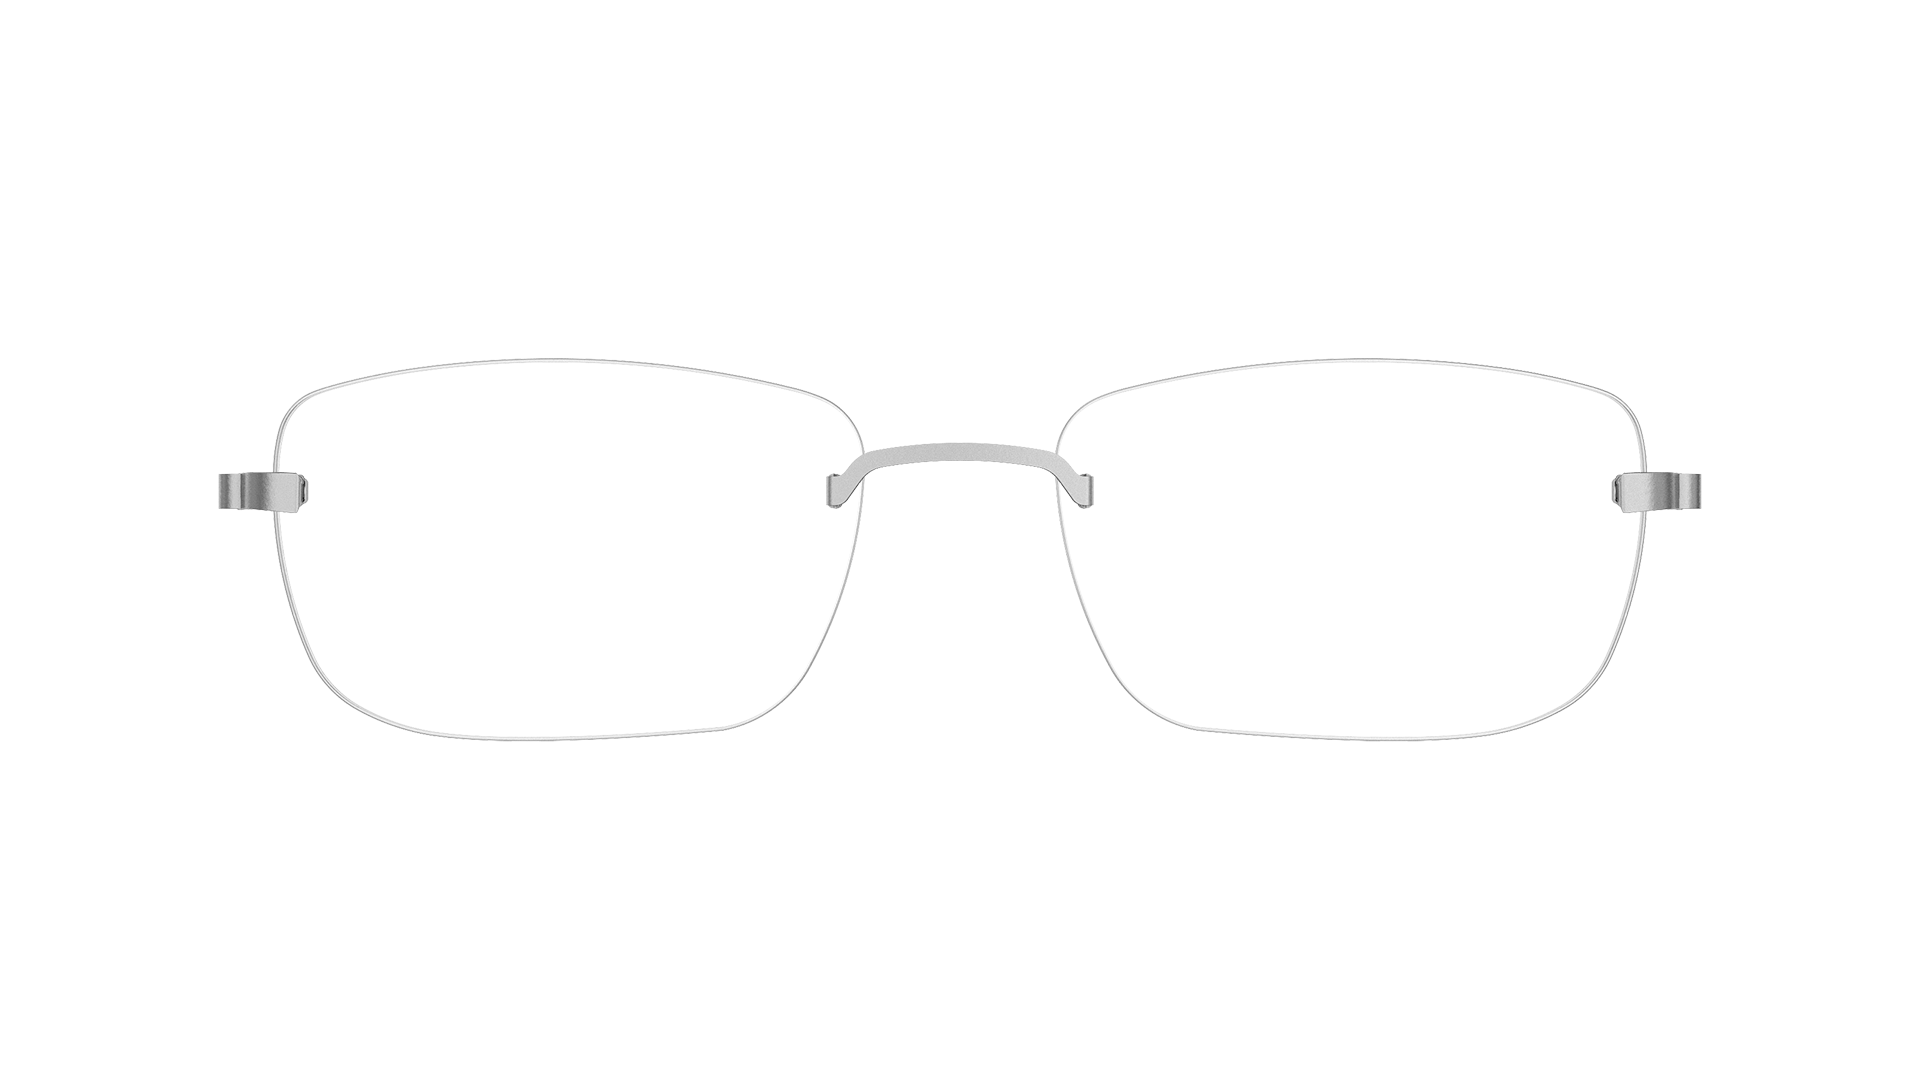 LINDBERG strip3p Model 2450 rectangle shaped rimless glasses with silver titanium temples and bridge